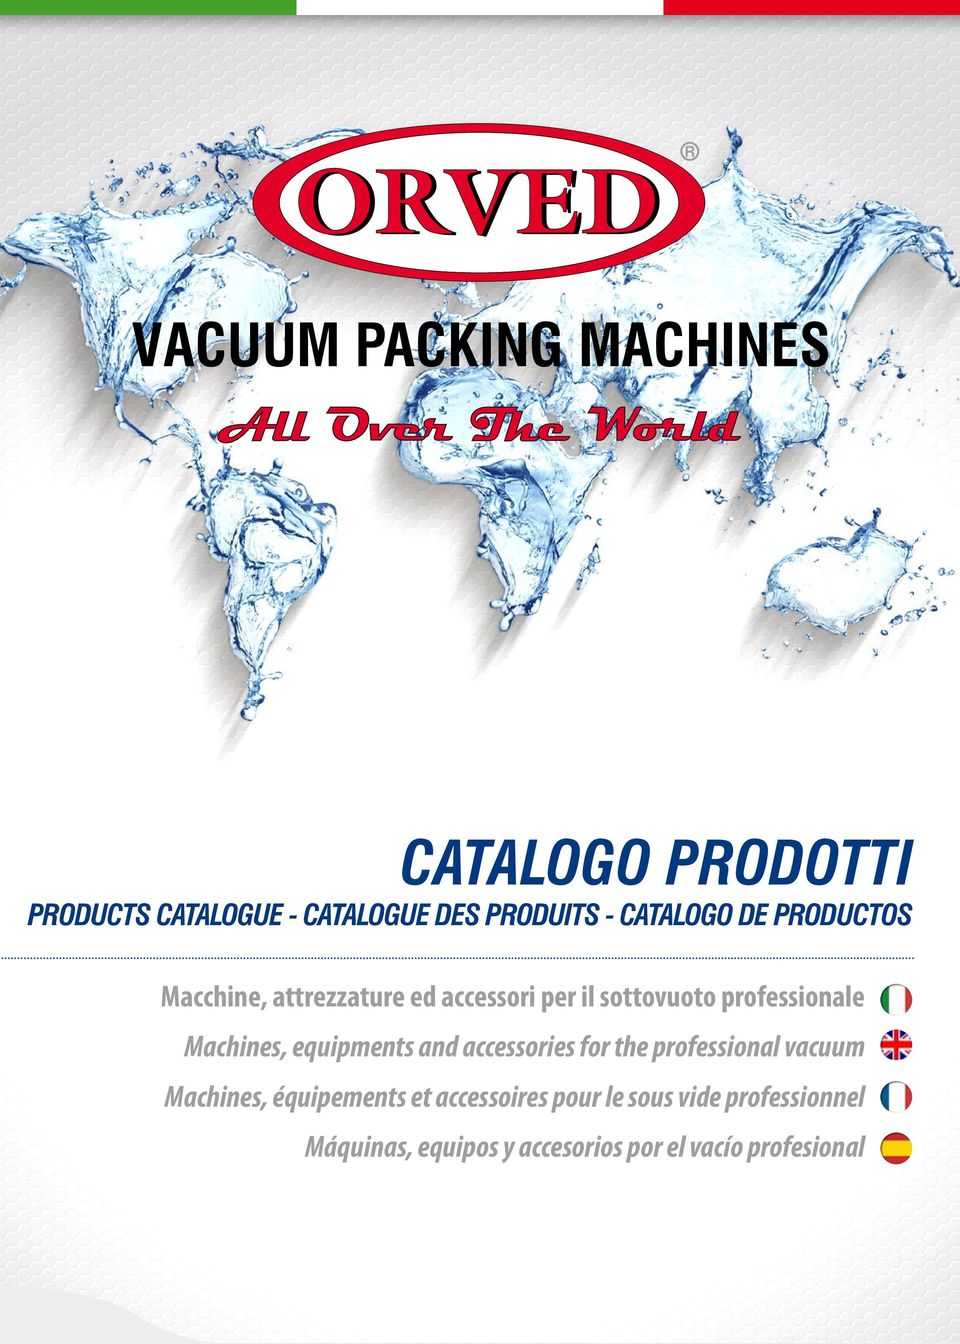 Machines, equipments and accessories for the professional vacuum Machines, équipements et